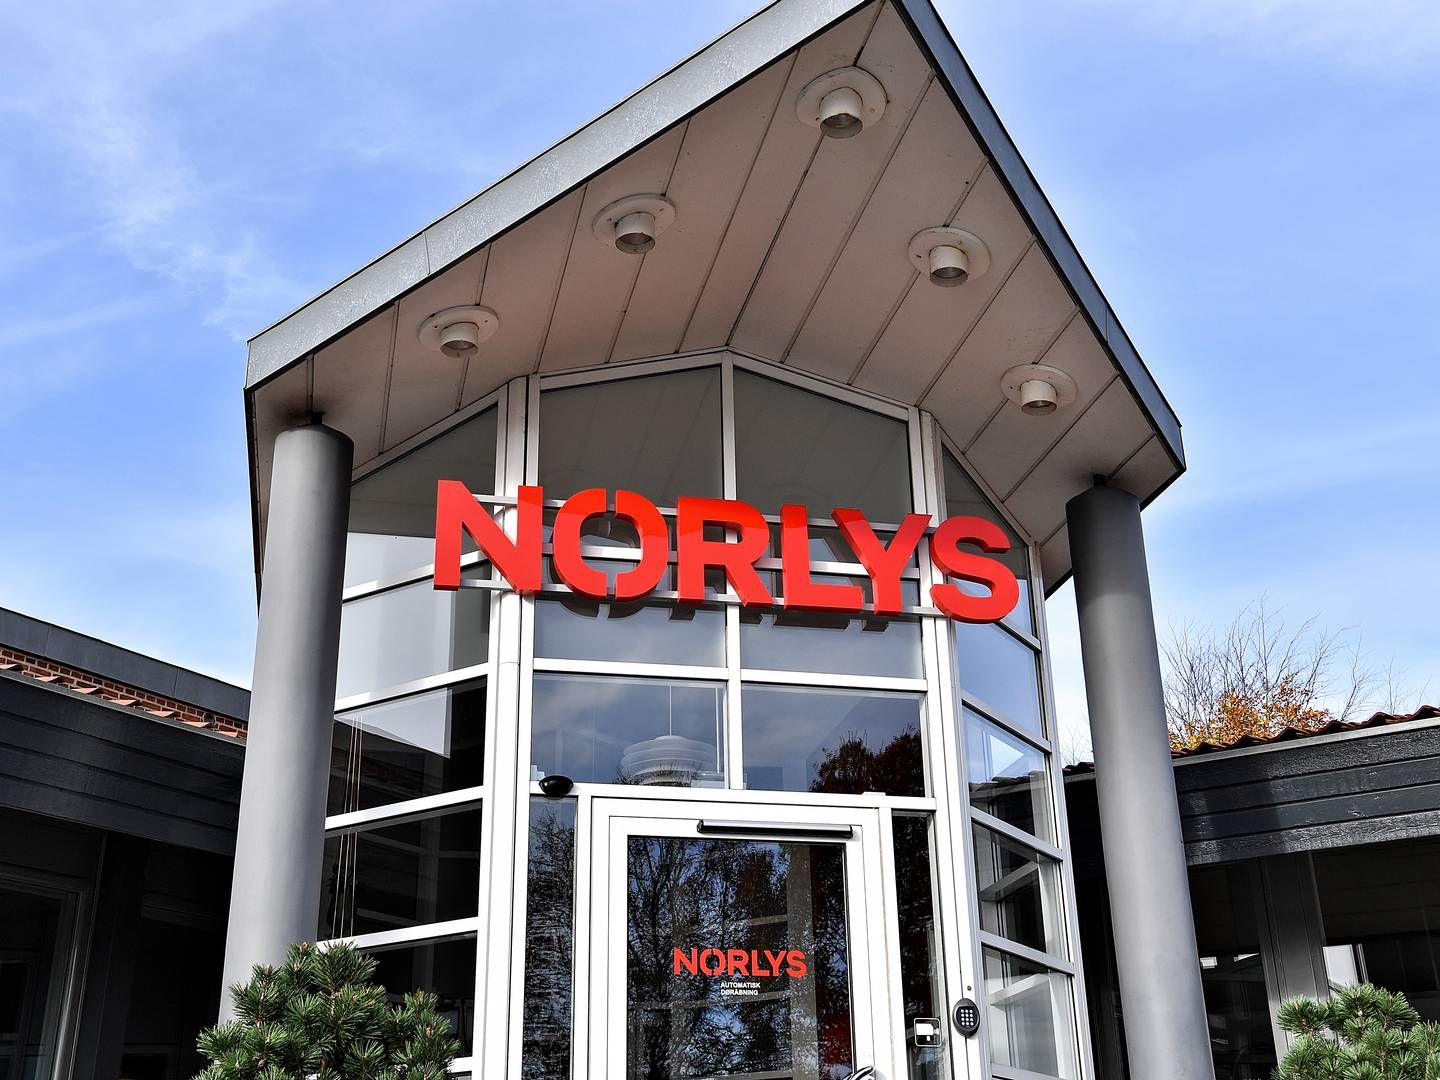 Norlys was recently the victim of a robbery at its Silkeborg location (not pictured). | Photo: Ernst van Norde